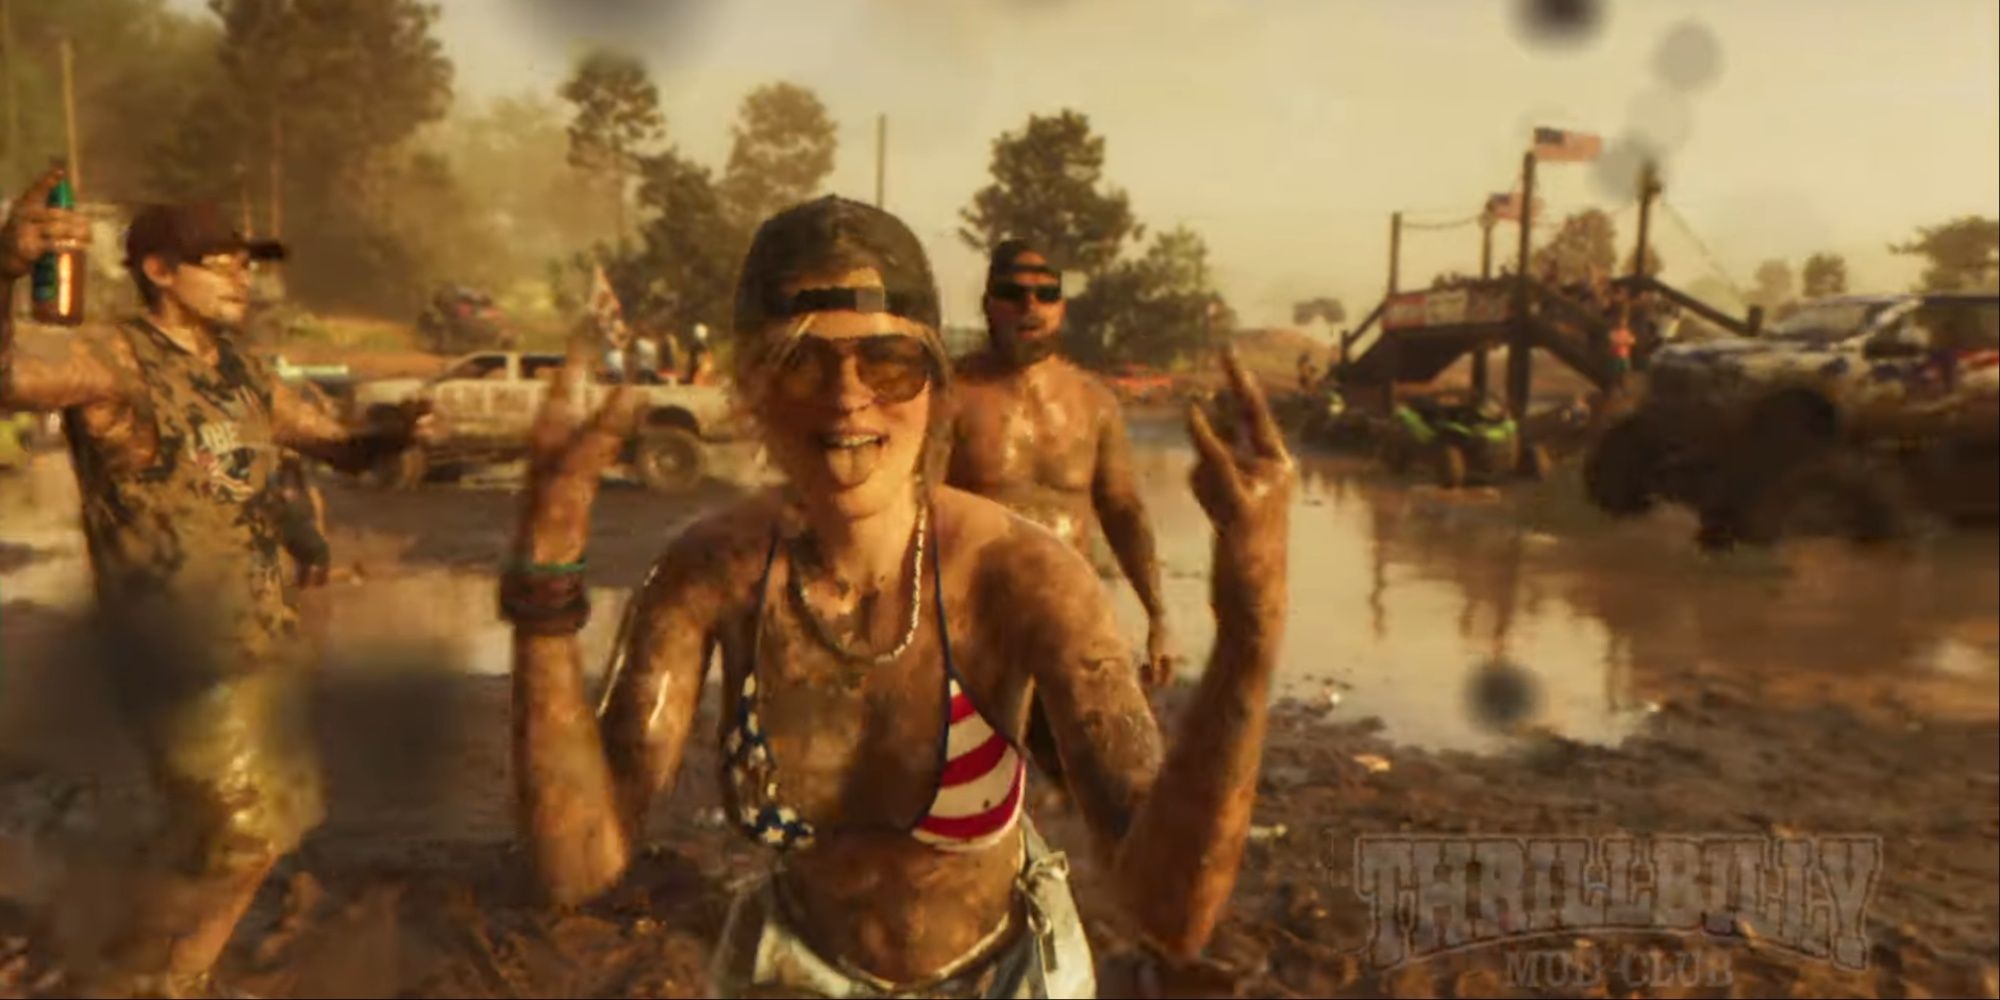 A trio of characters covered in mud, one with beer, another one shirtless with a cap and sunglasses, and a woman in an American flag bikini throwing up the 'rock out hand sign and sticking out her tongue to the camera